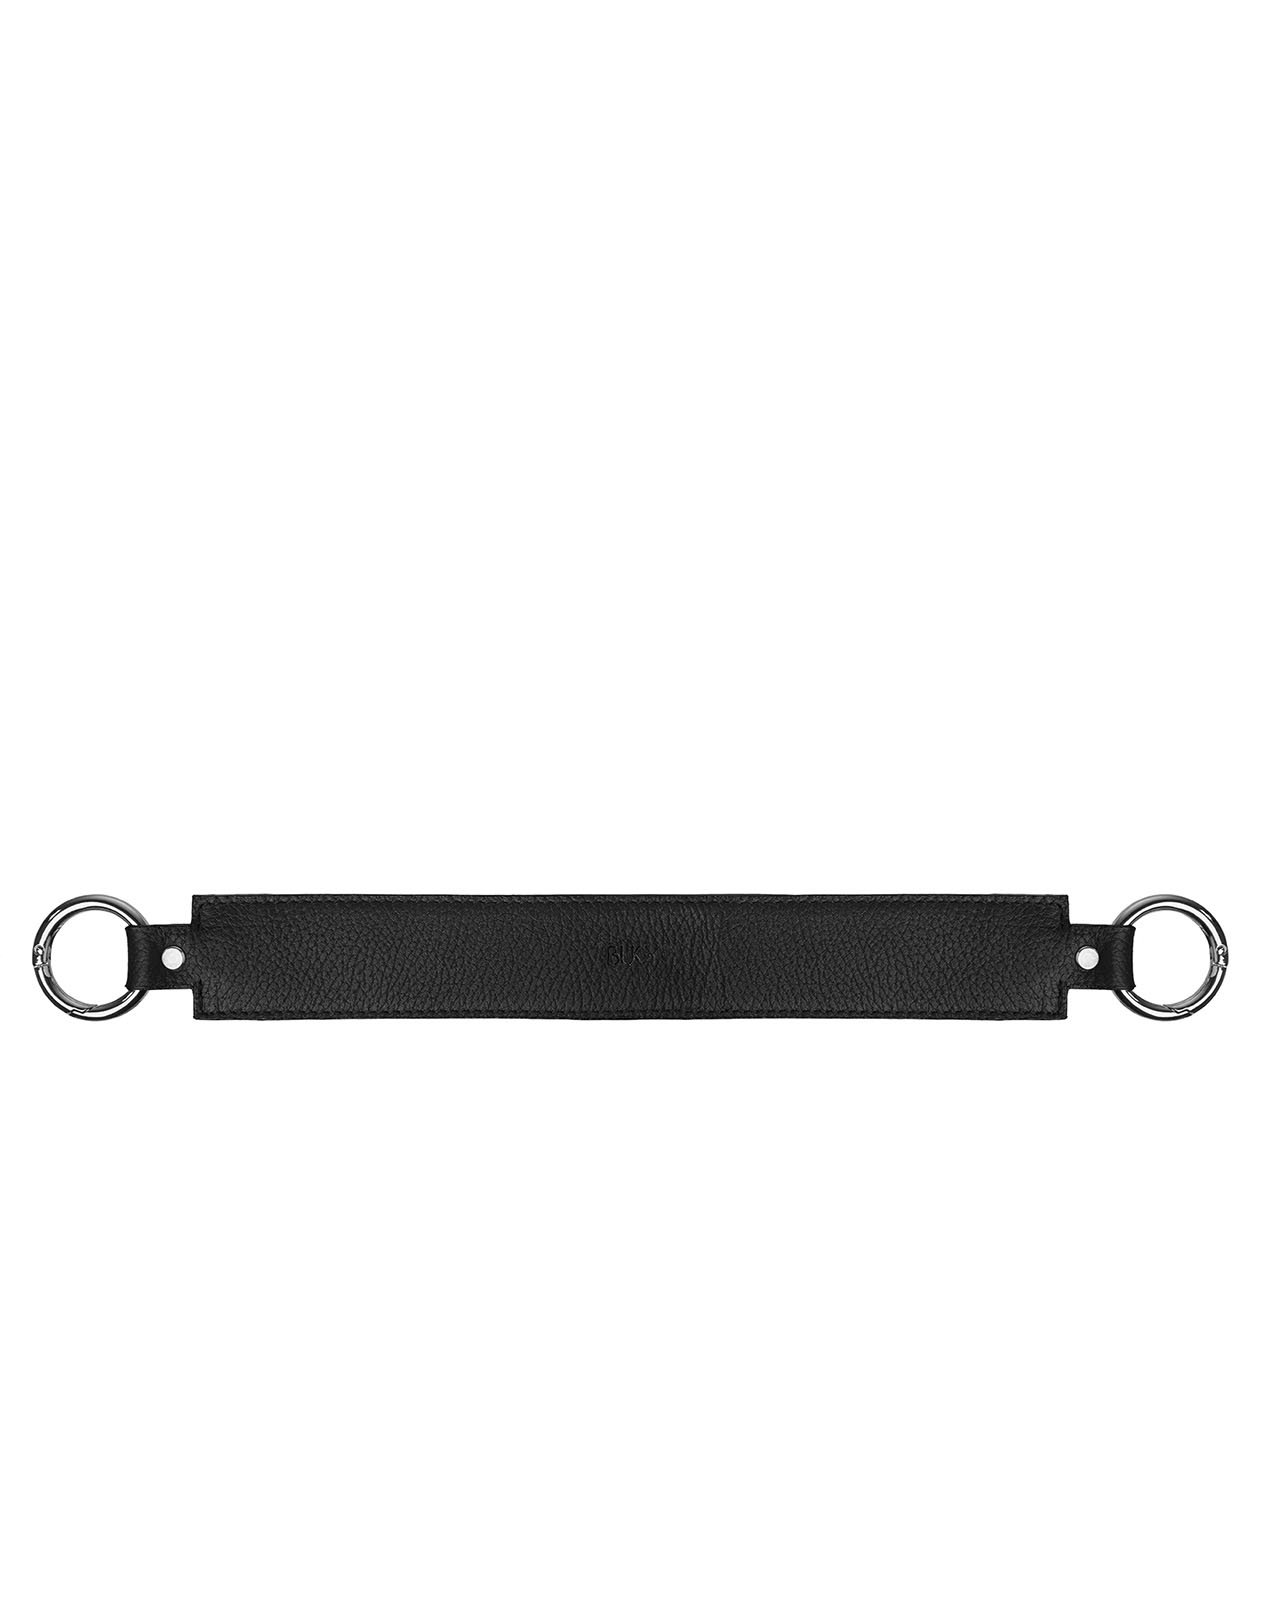 Bukvy Multi Strap - Black with Silver Fittings